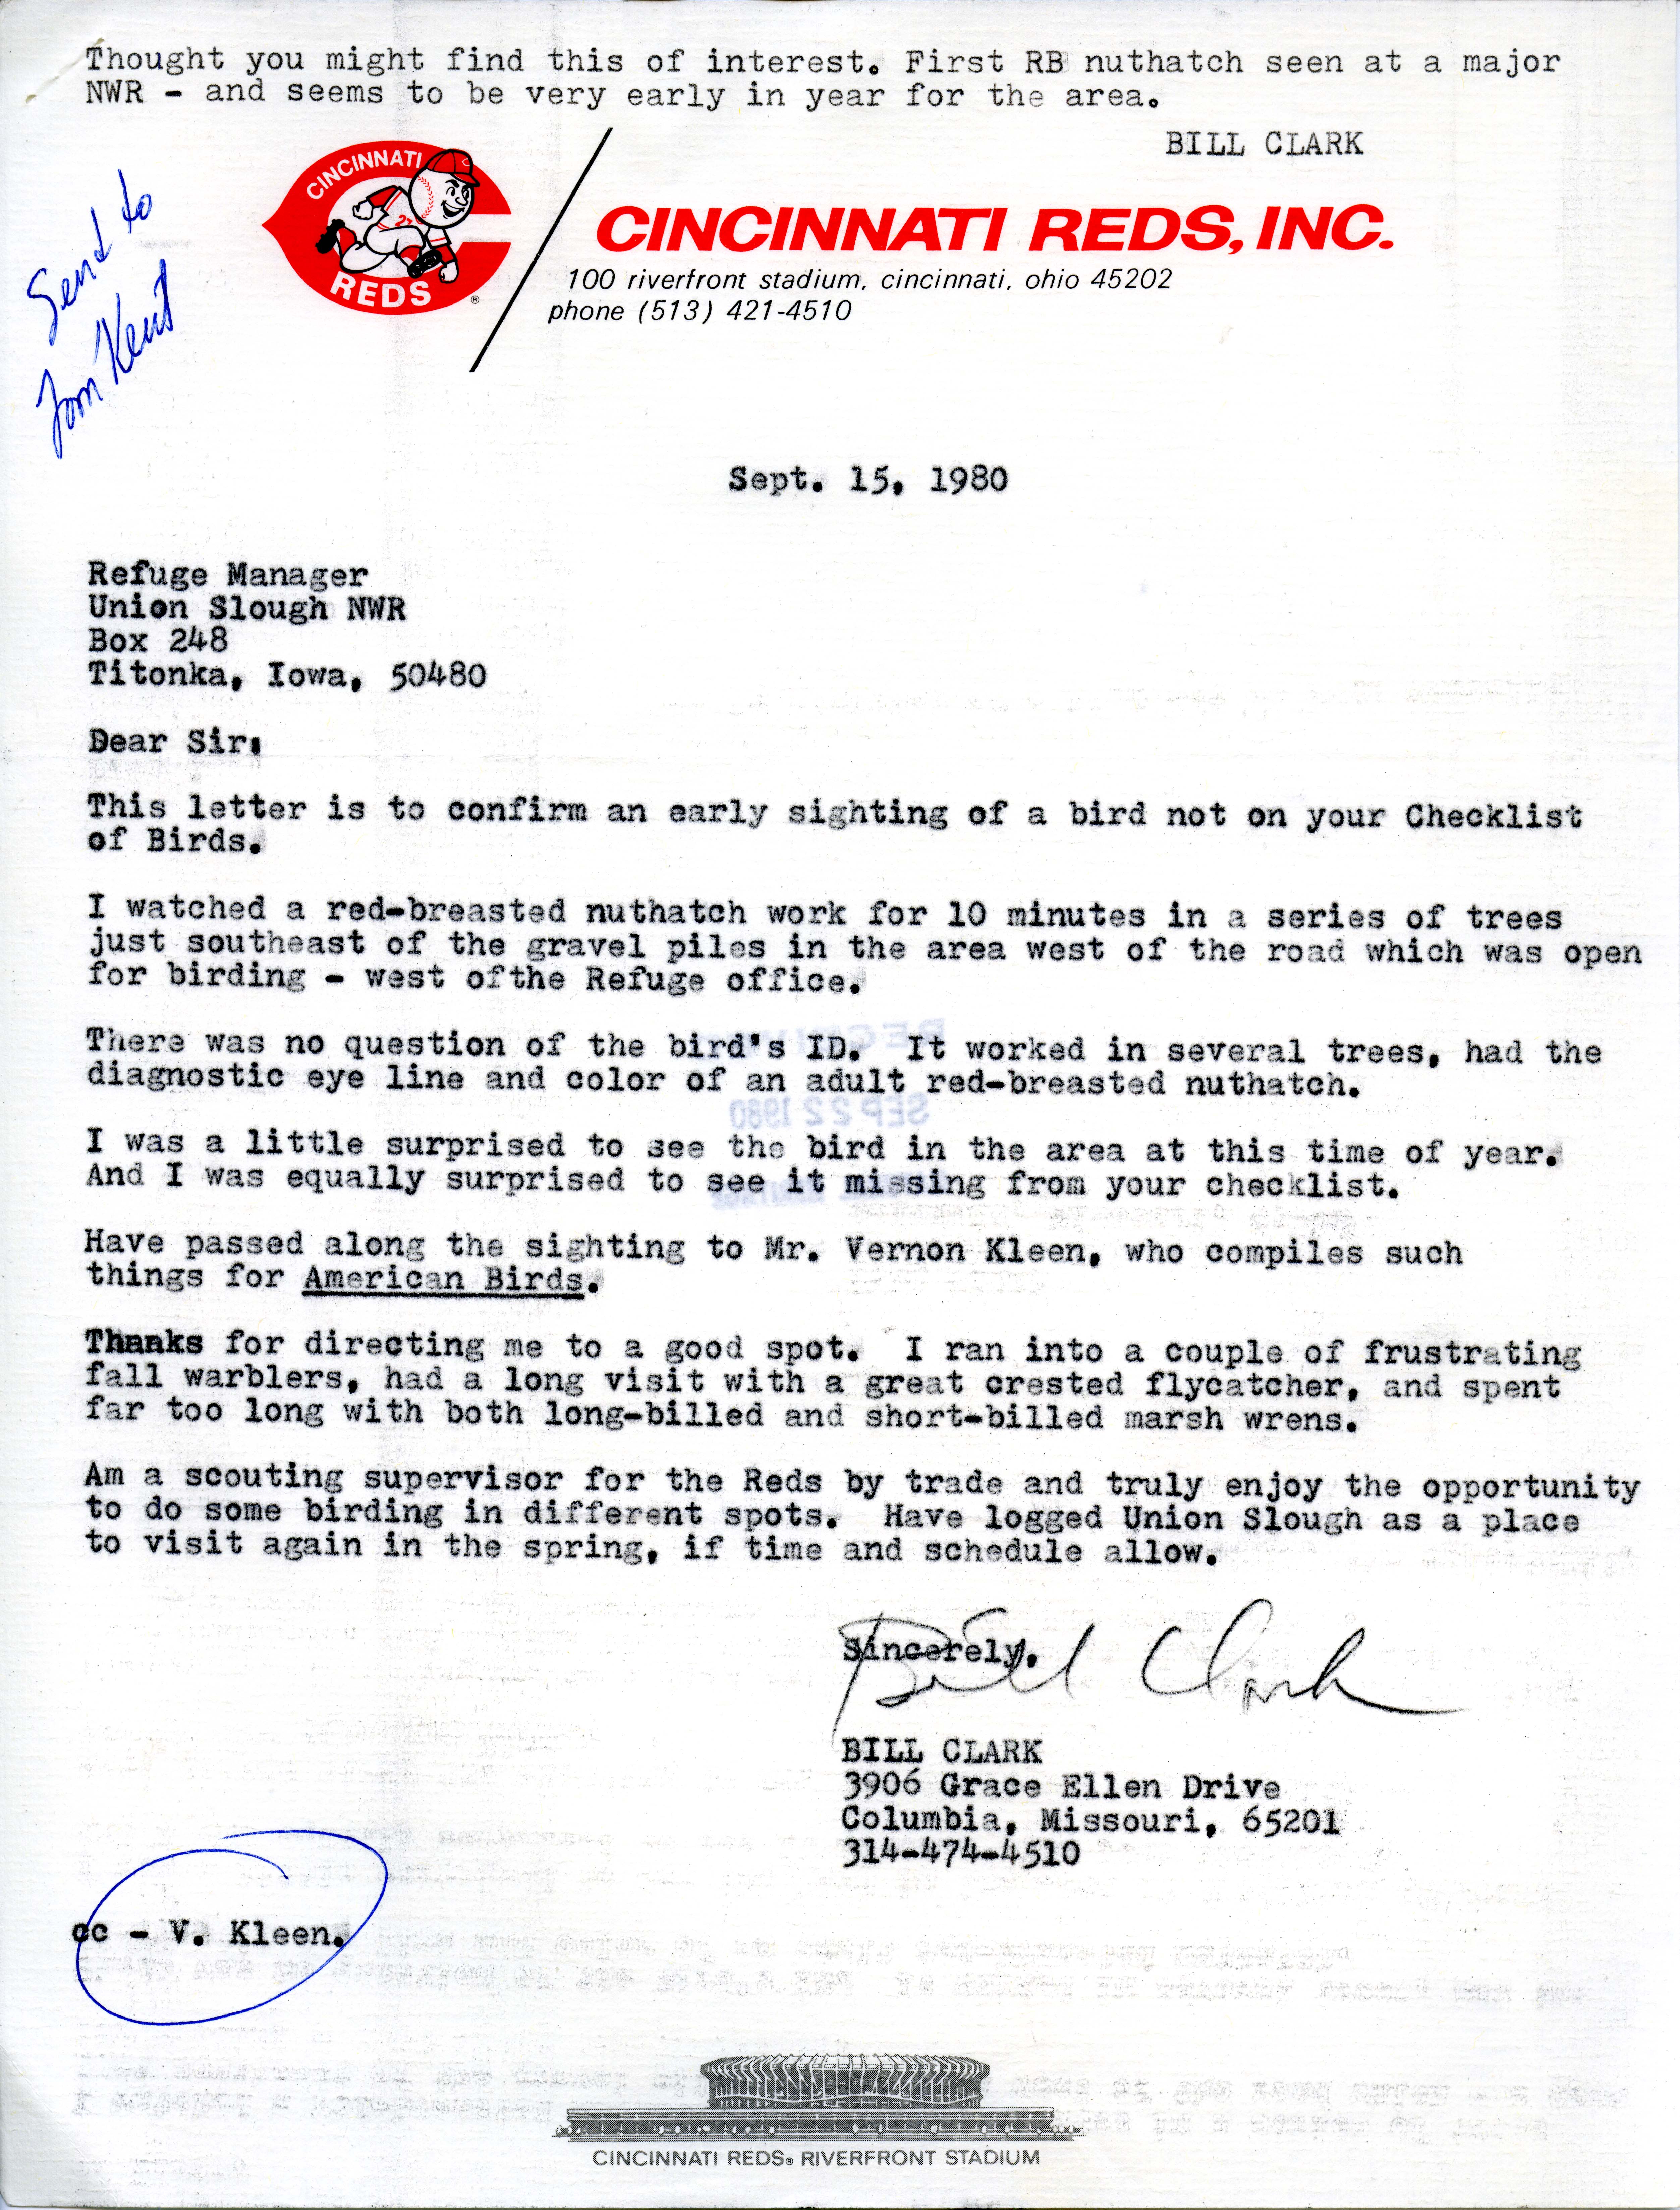 Bill Clark letter to the Union Slough Refuge Manager regarding an early sighting of a Red-breasted Nuthatch, September 15, 1980